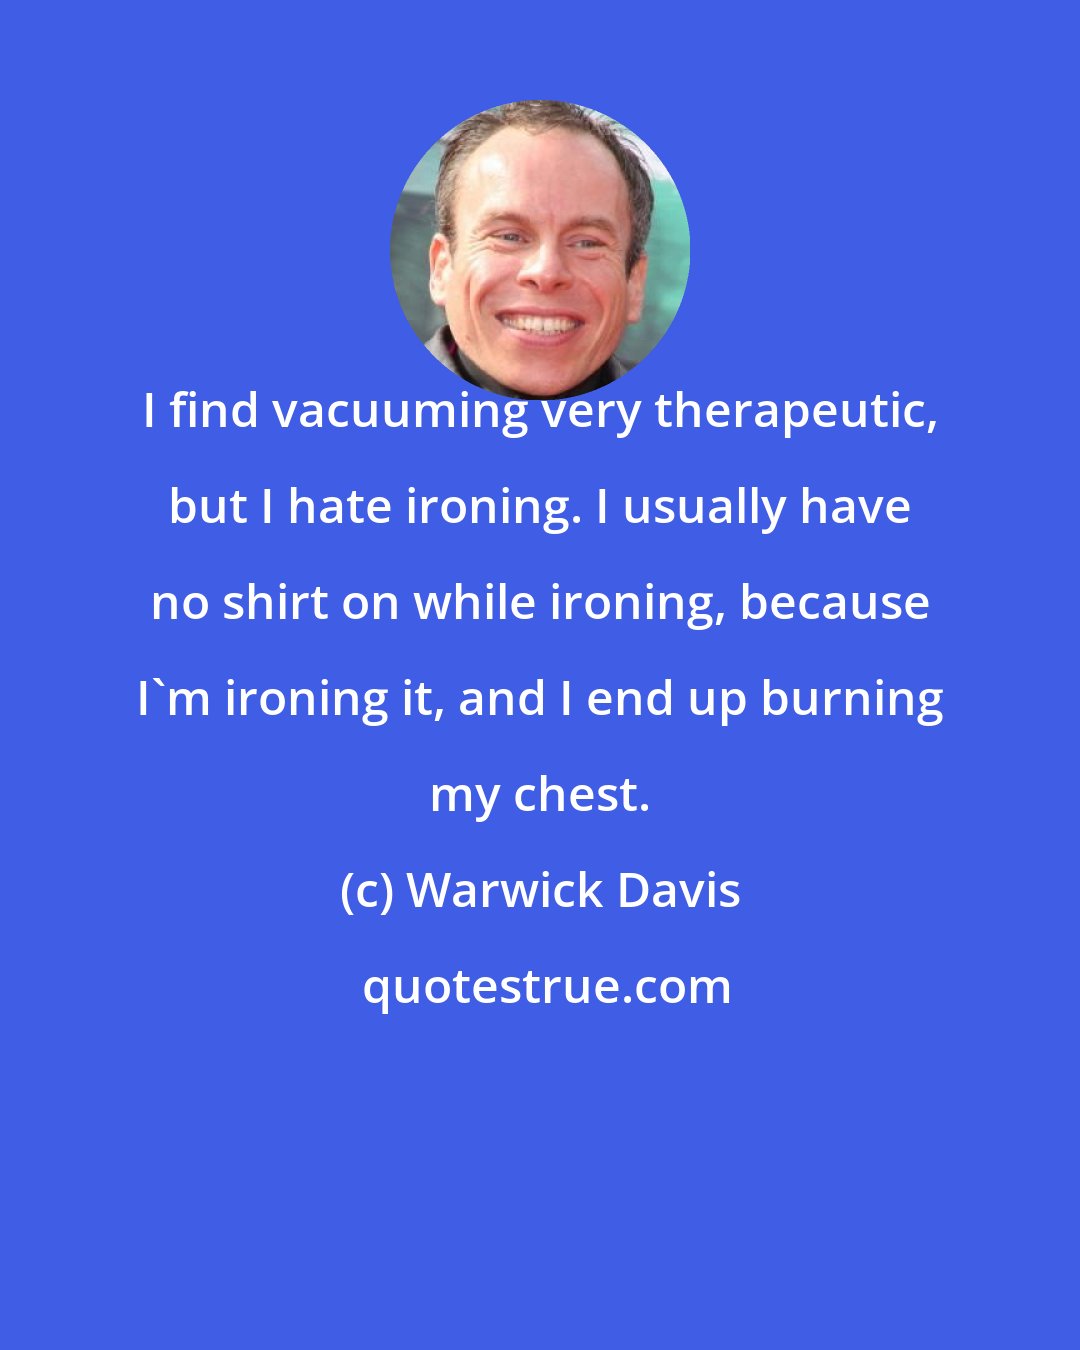 Warwick Davis: I find vacuuming very therapeutic, but I hate ironing. I usually have no shirt on while ironing, because I'm ironing it, and I end up burning my chest.